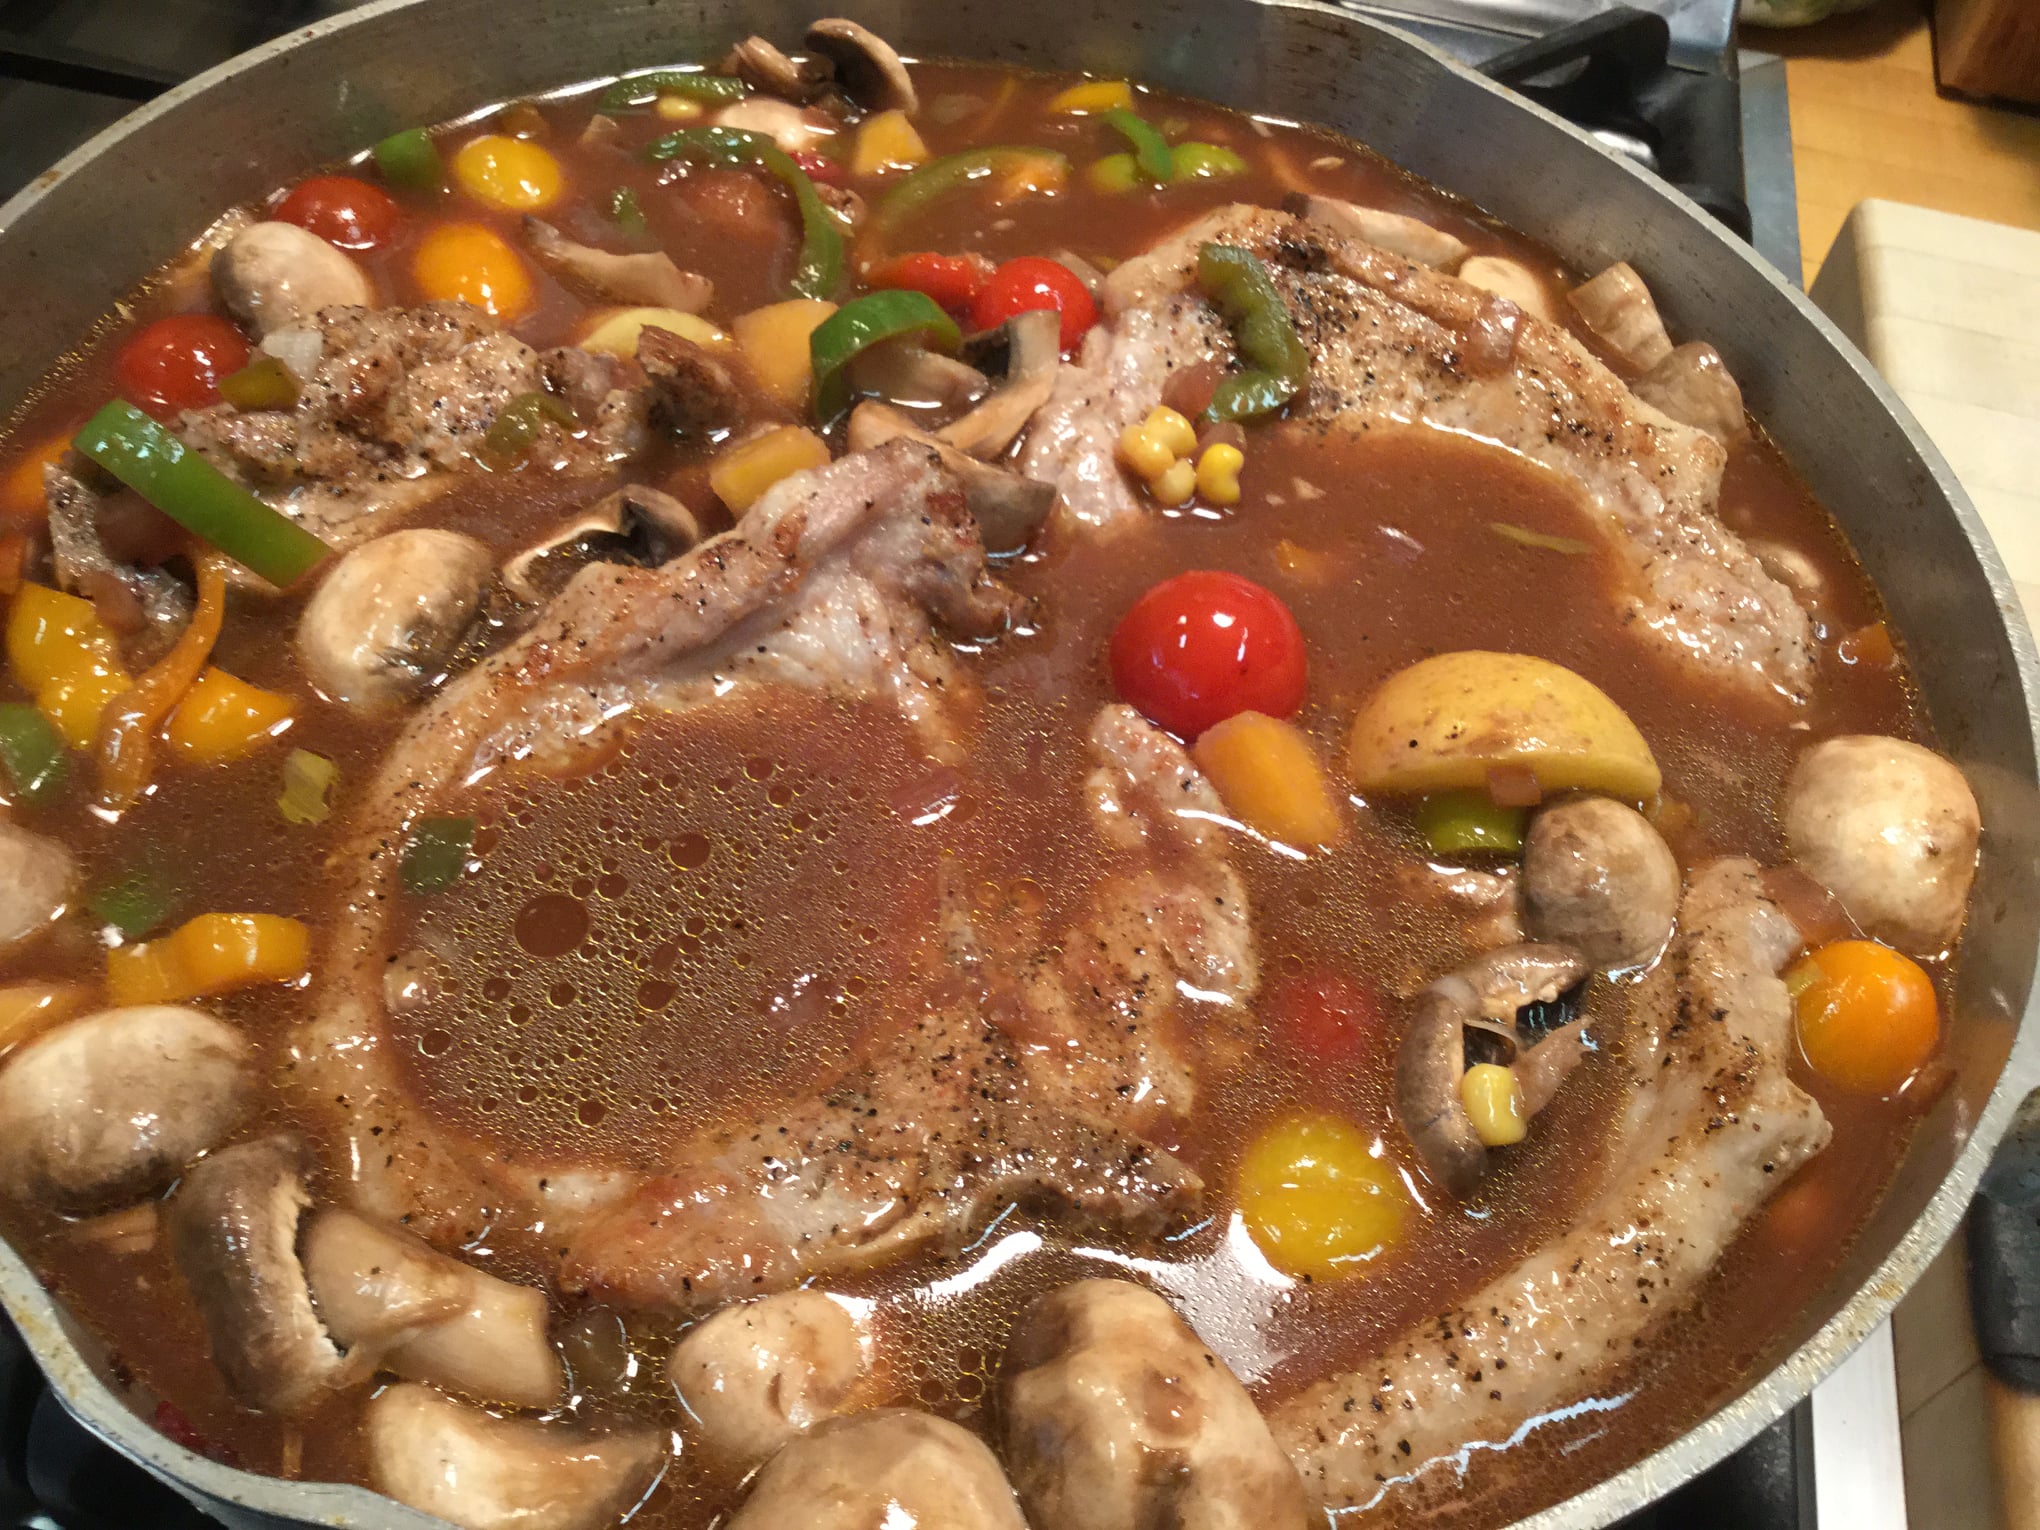 Smothered Center-Cut Pork Chops with Summer Veggies